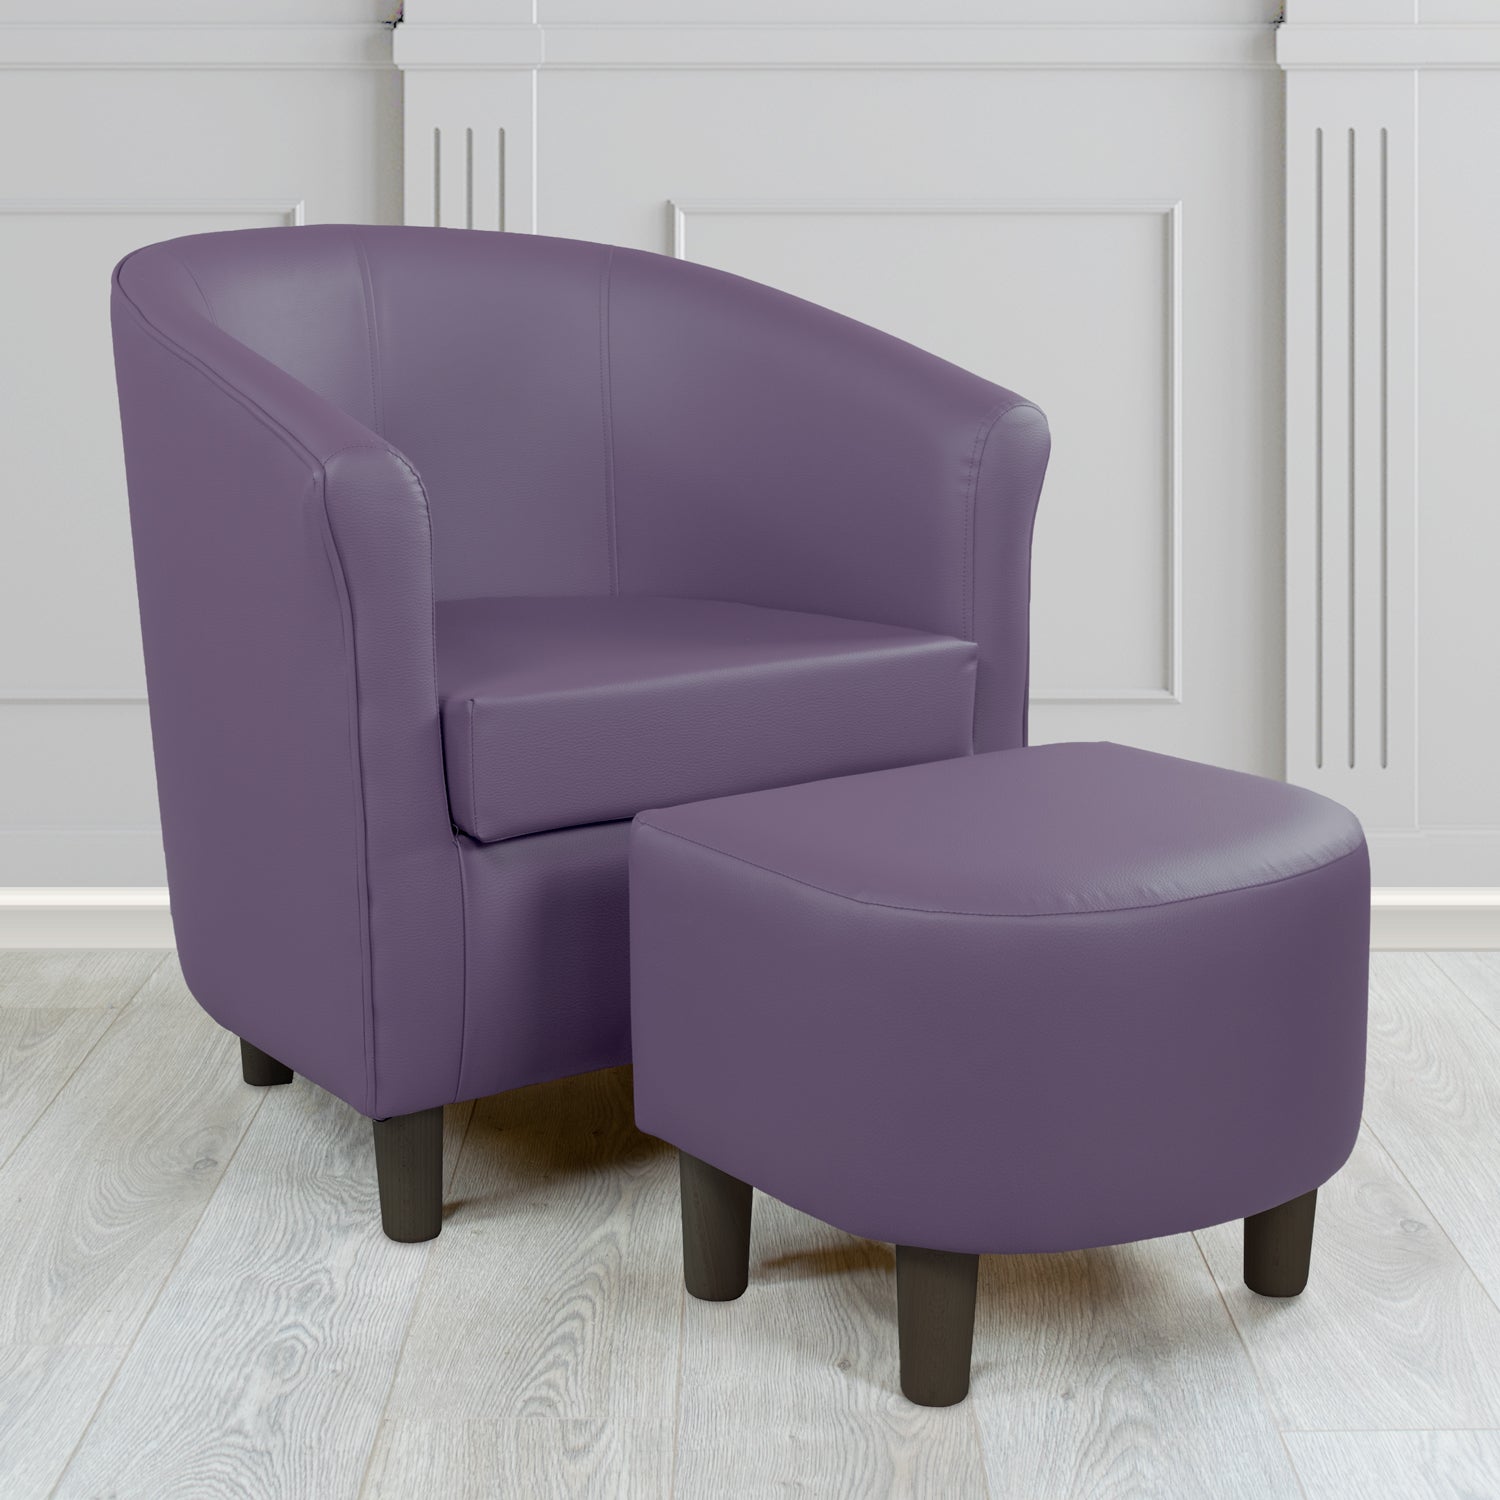 Tuscany Just Colour Professor Plum Faux Leather Tub Chair with Footstool Set - The Tub Chair Shop